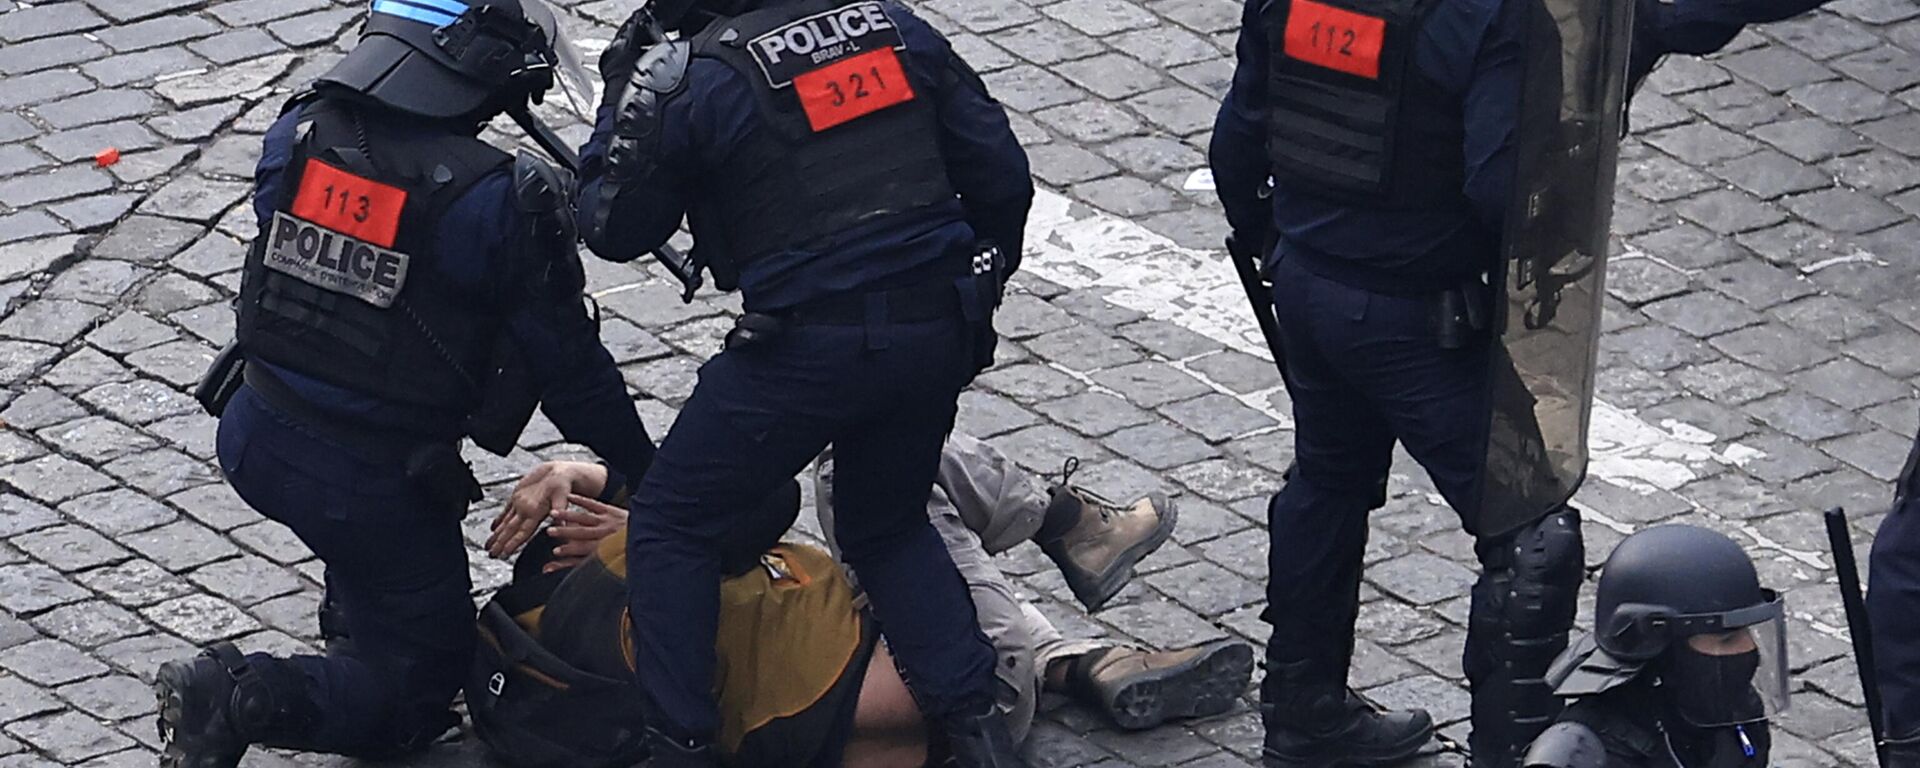 A protester is detained by riot police officers during a demonstration, Tuesday, March 7, 2023 in Paris. - Sputnik International, 1920, 01.05.2023